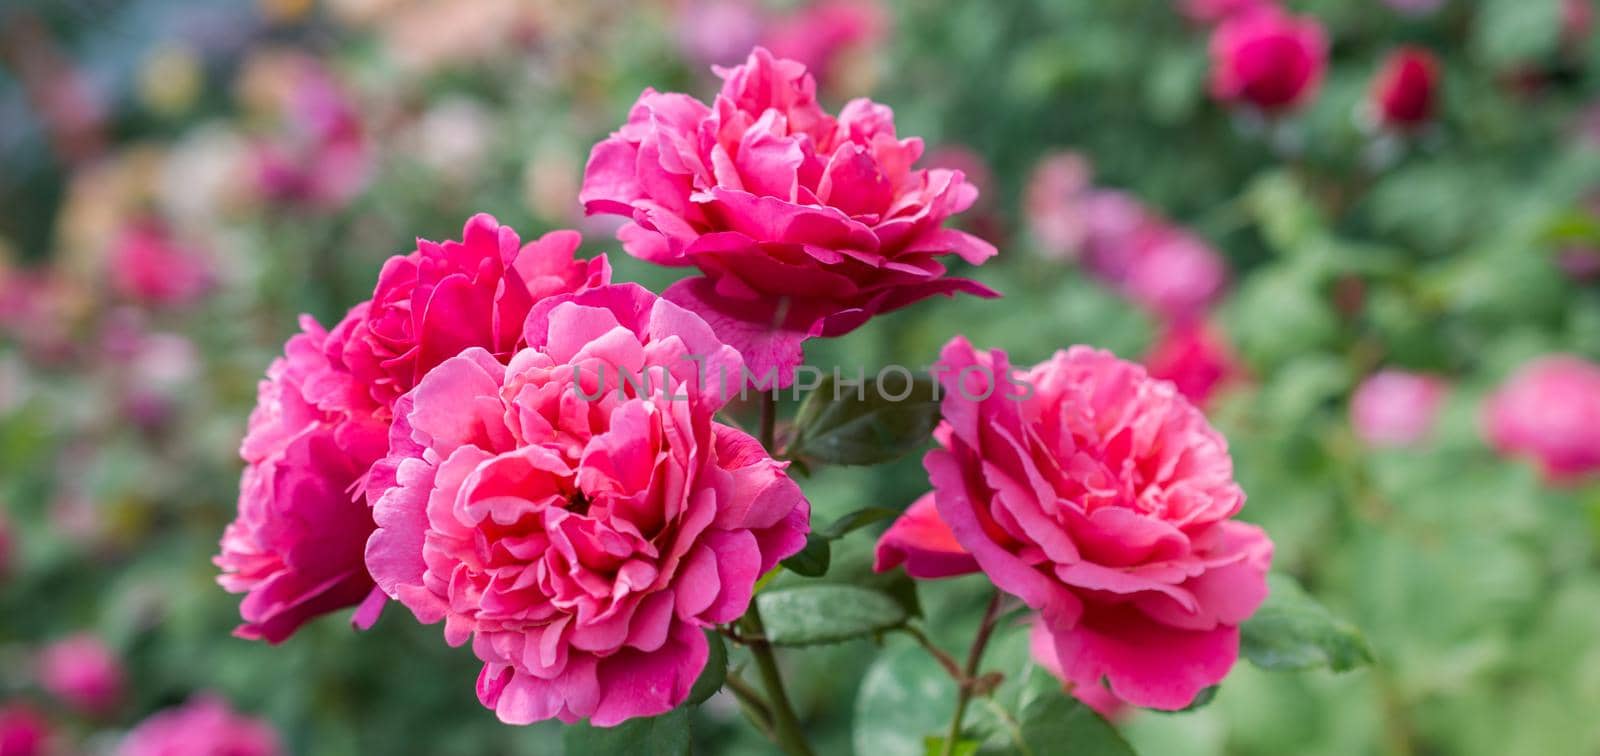 Blooming beautiful bunch of  roses in the garden by berkay